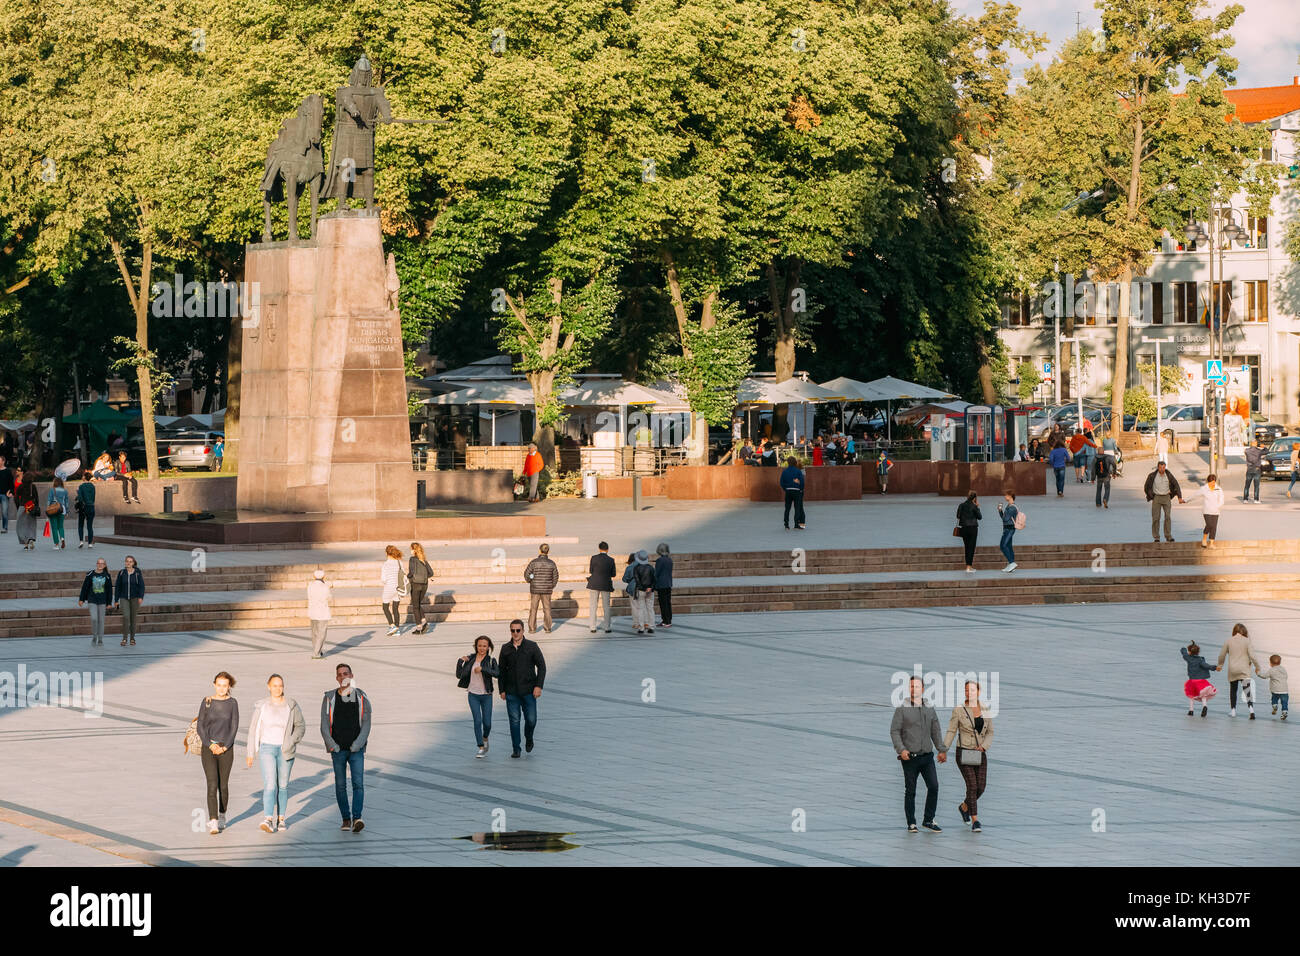 Vilnius, Lithuania - July 7, 2016: People Walking Near Monument To Gediminas Is Grand Duke Of Lithuania. Stock Photo